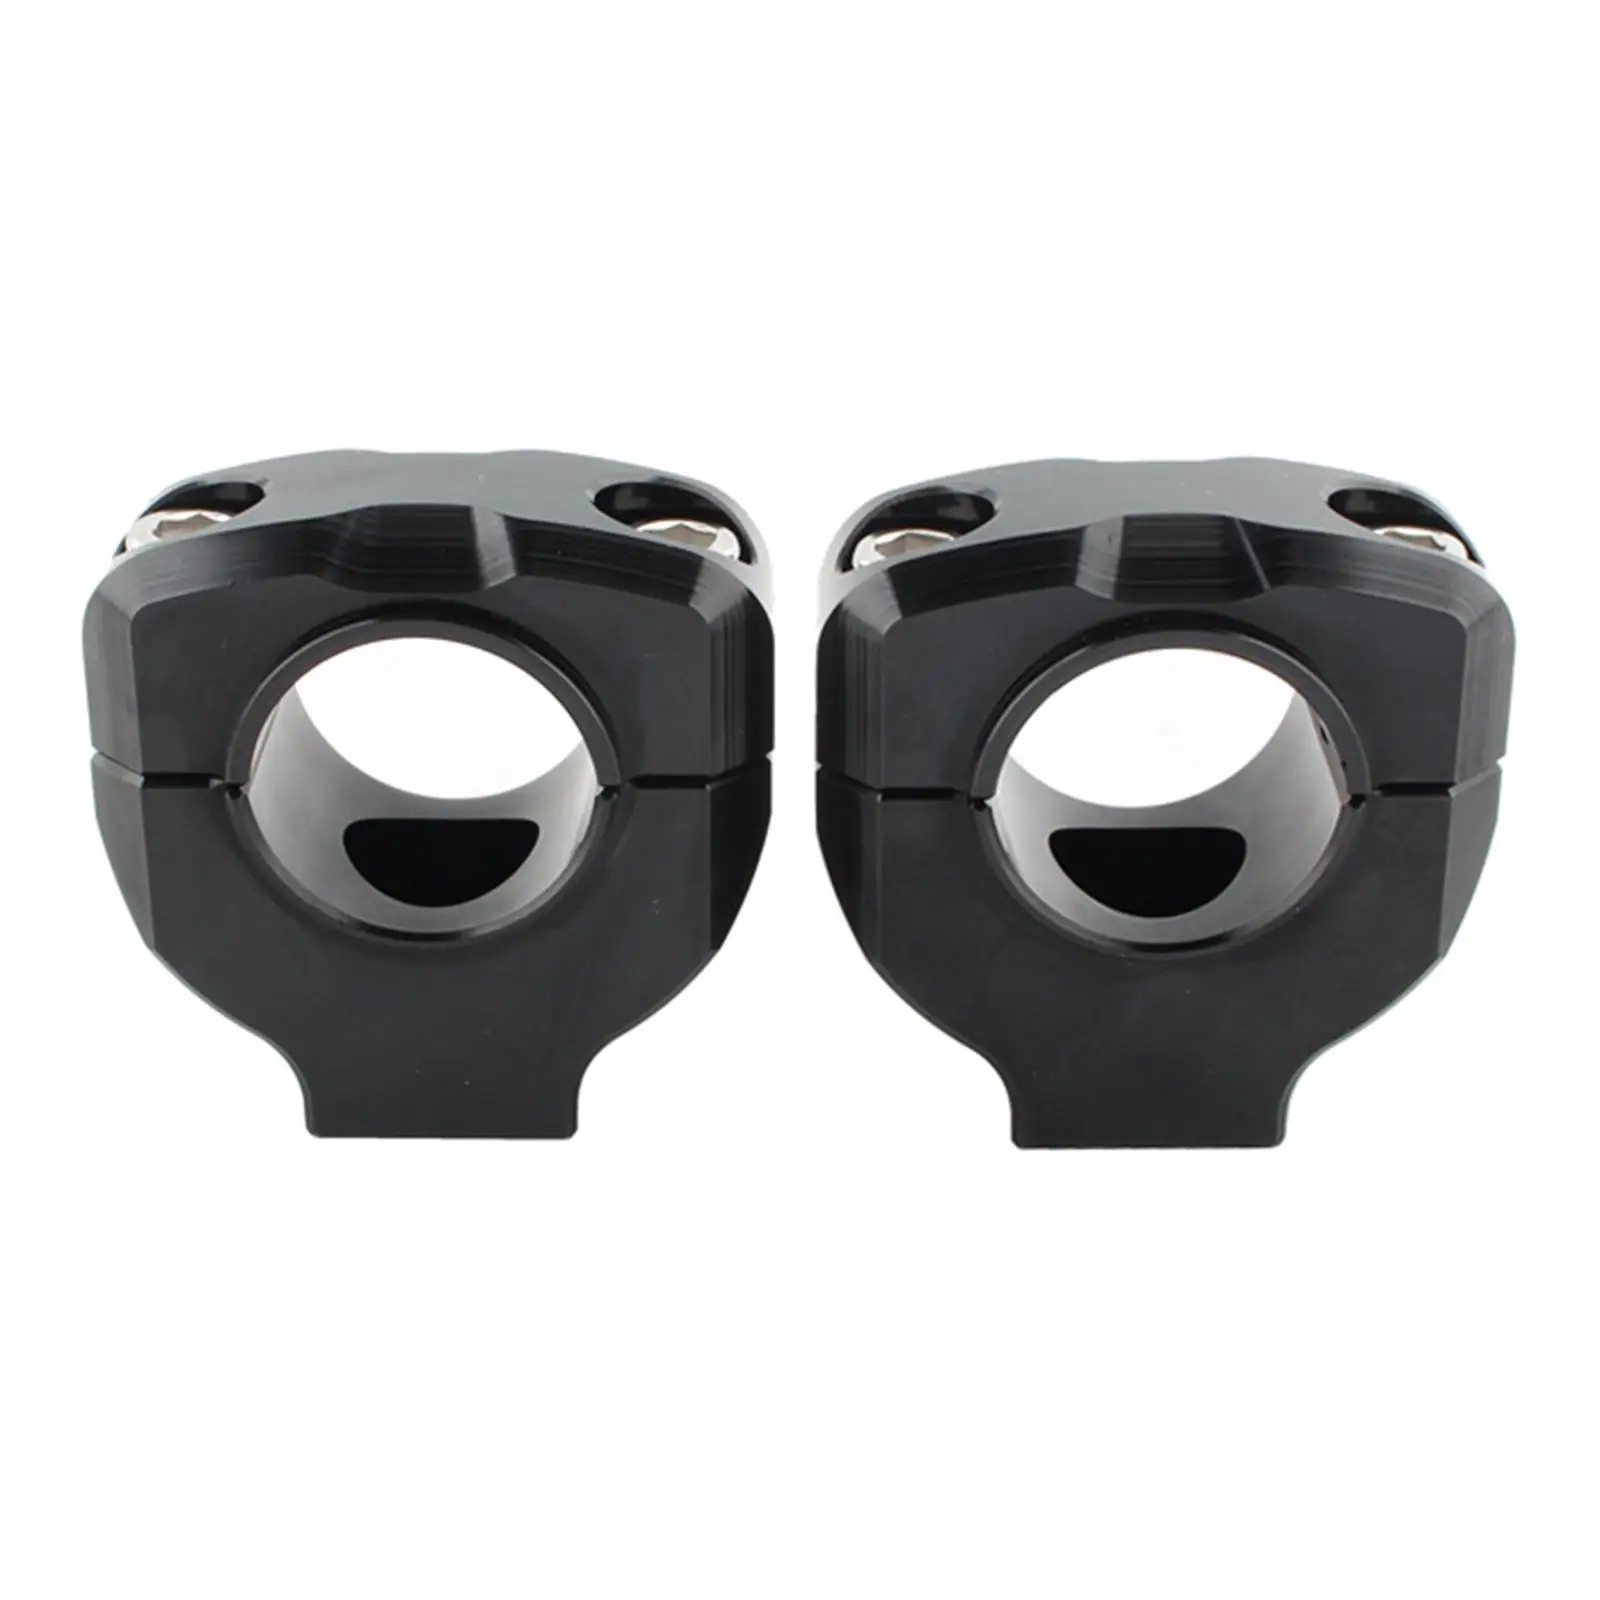 1 pair of universal motorcycle 28mm 1/8 inch handlebar riser clamp   Lifter - £16.80 GBP